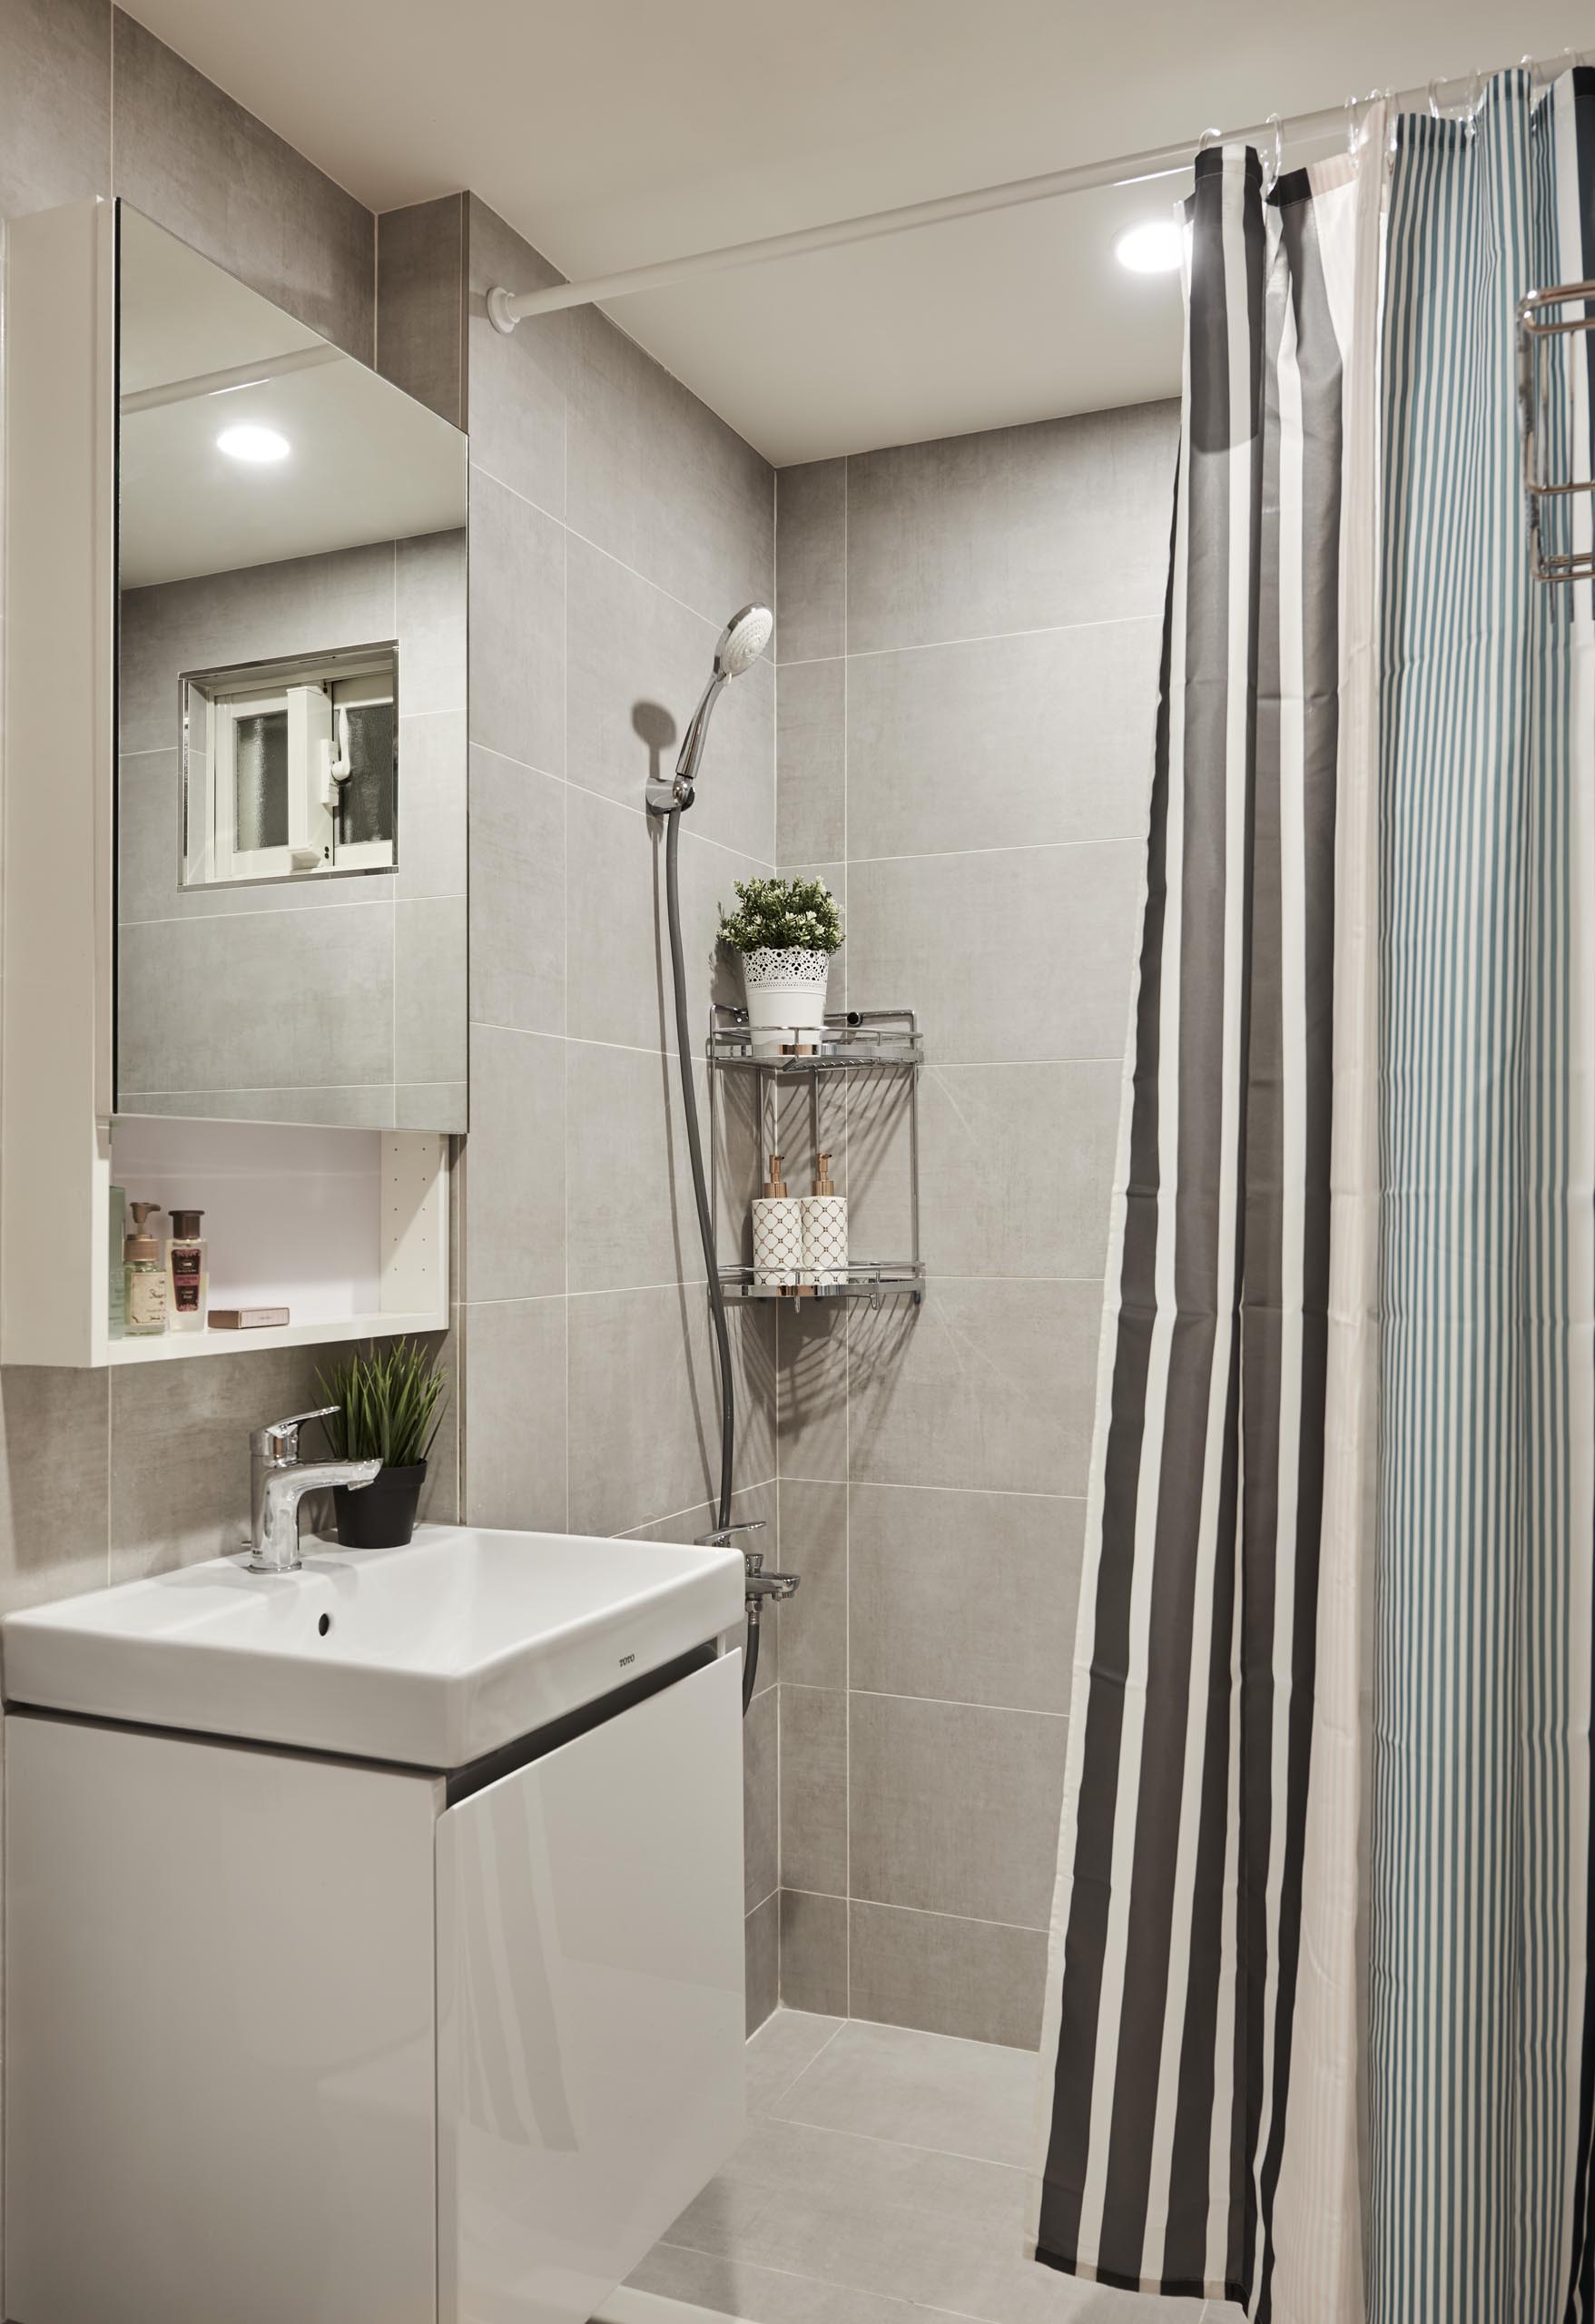 In this small bathroom, there's large format tiles that cover the walls and floors.